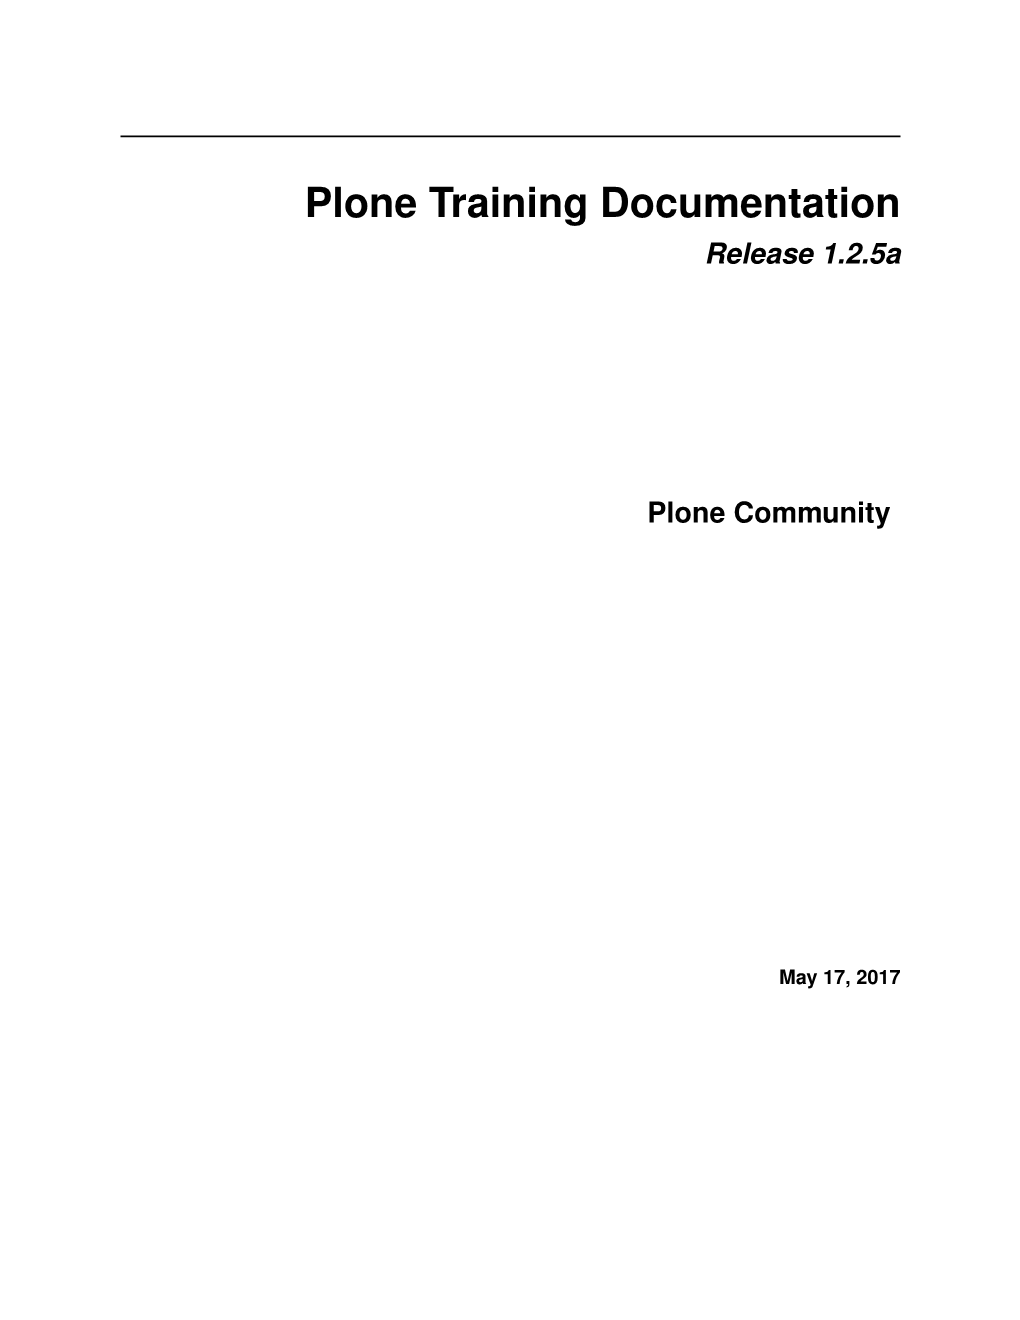 Plone Training Documentation Release 1.2.5A